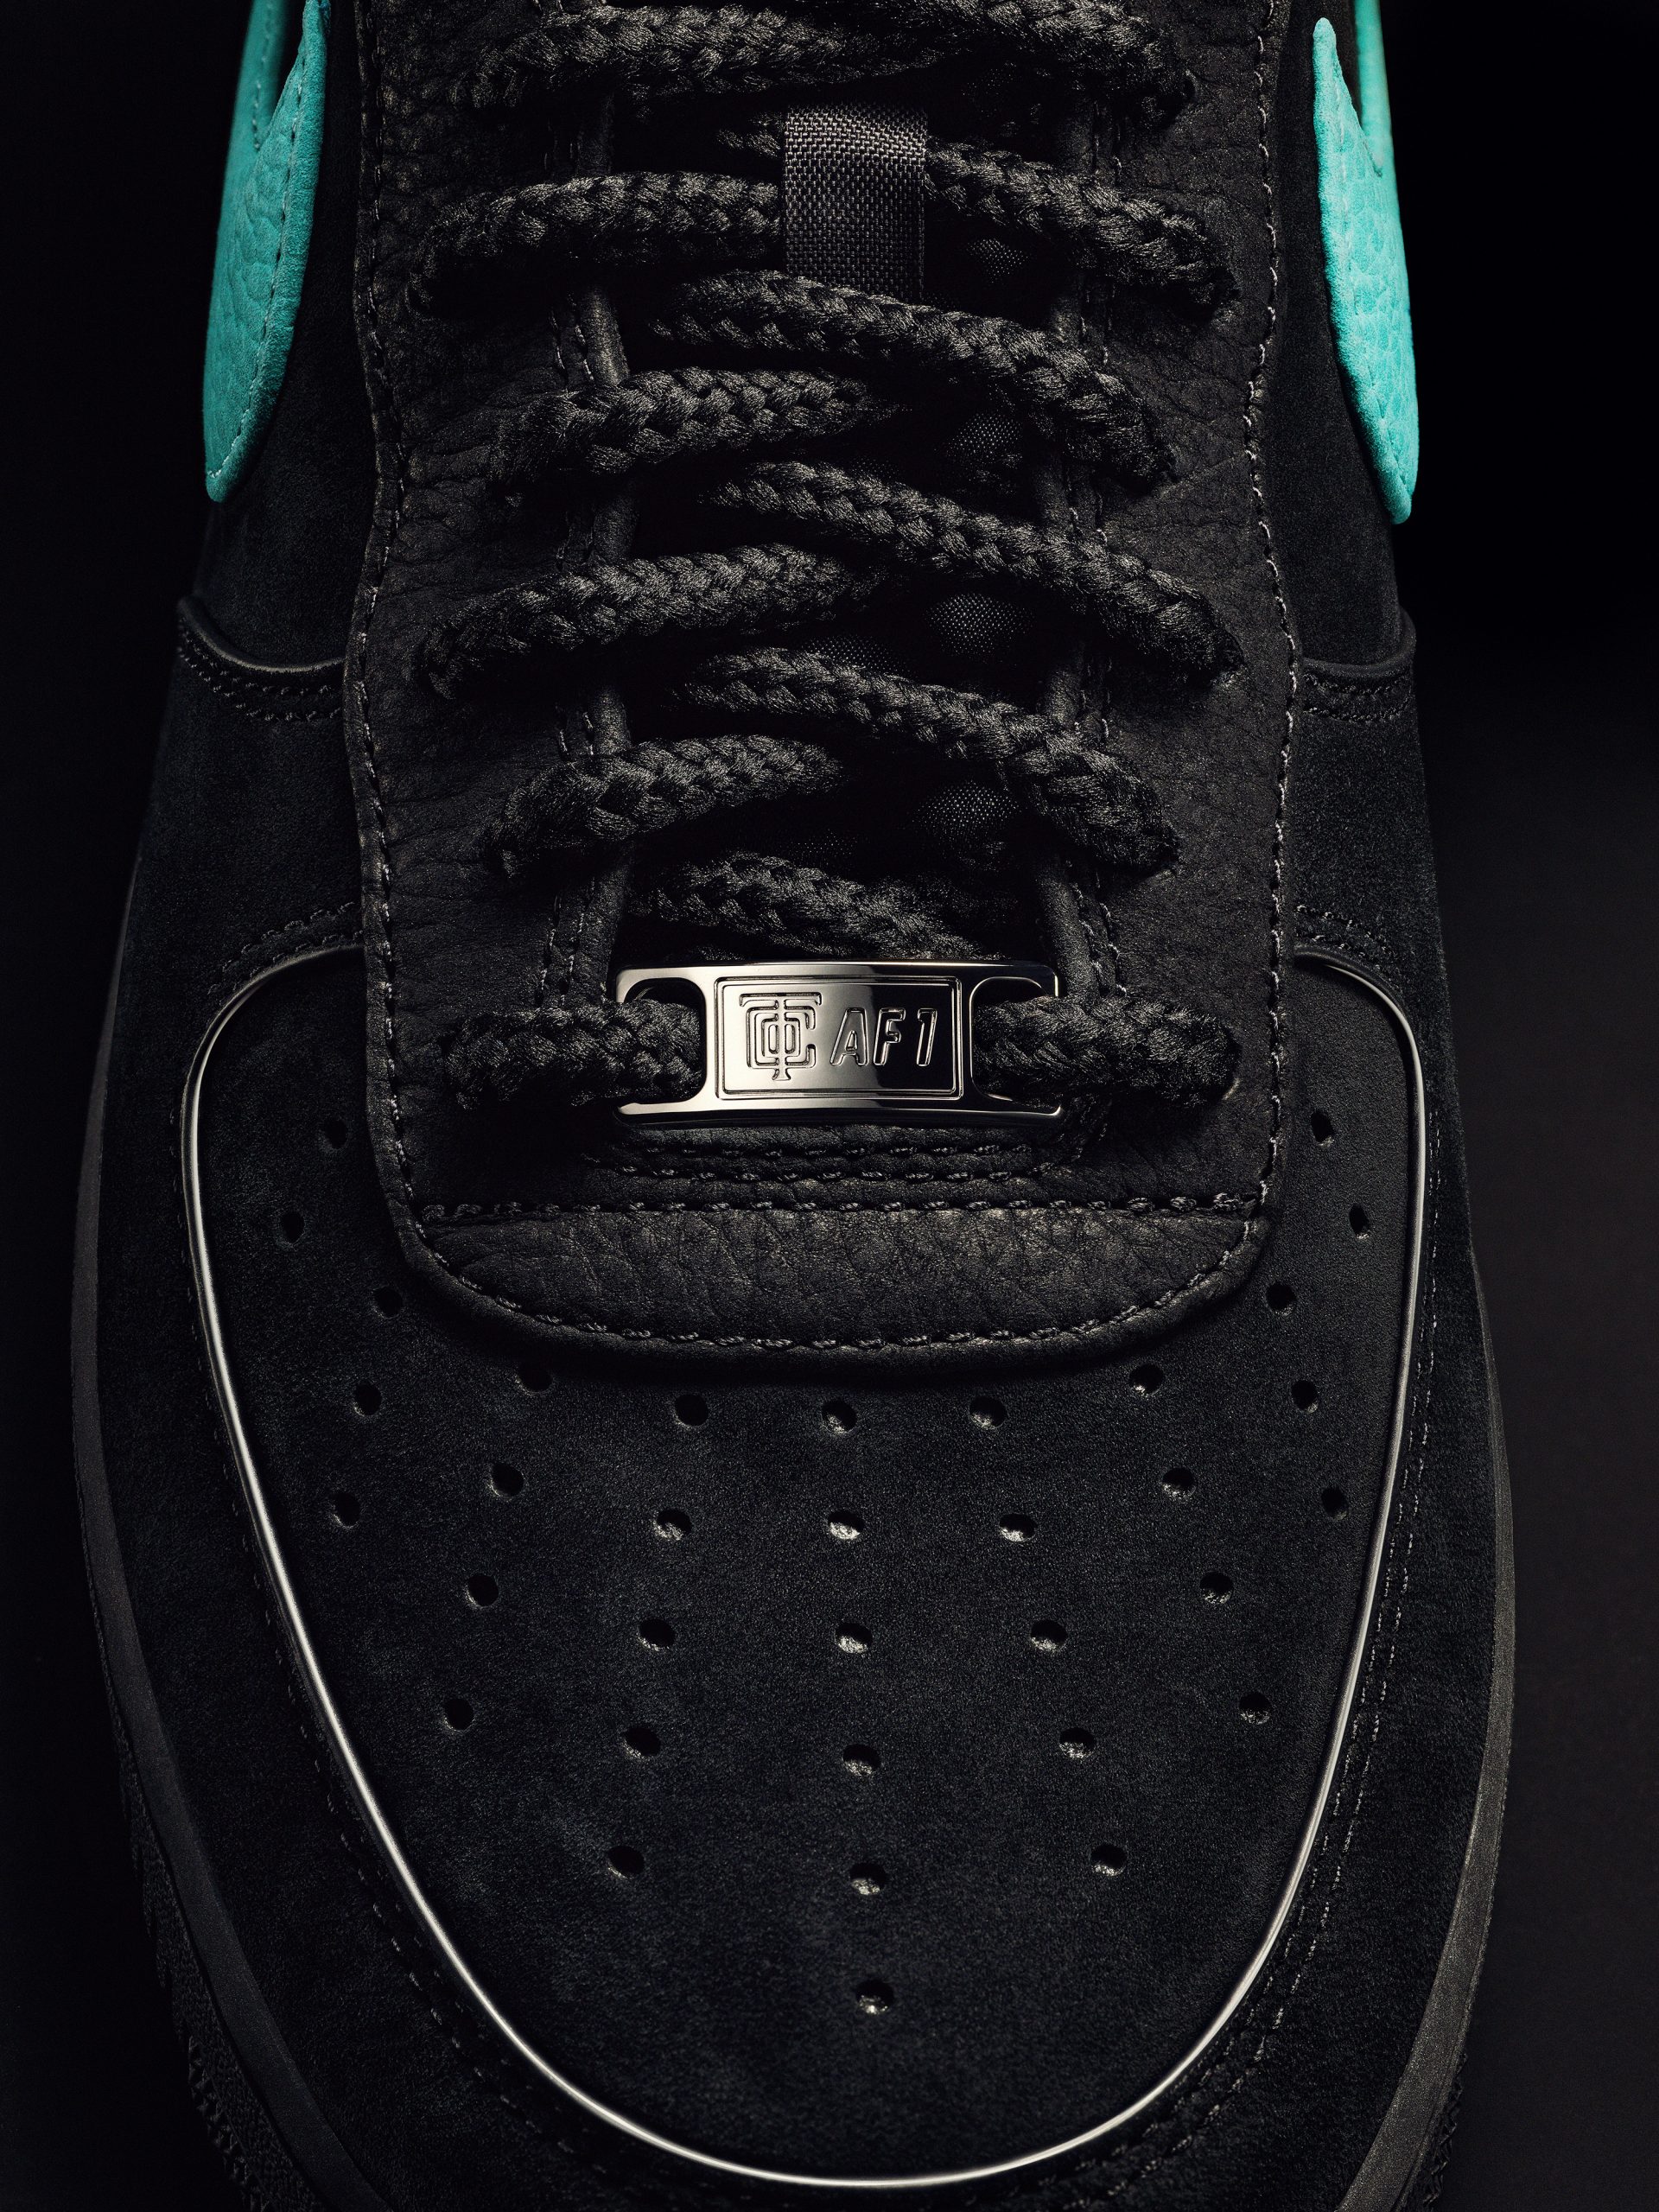 Tiffany & Co. and Nike Team Up For a Legendary Debut of the Exclusive ...